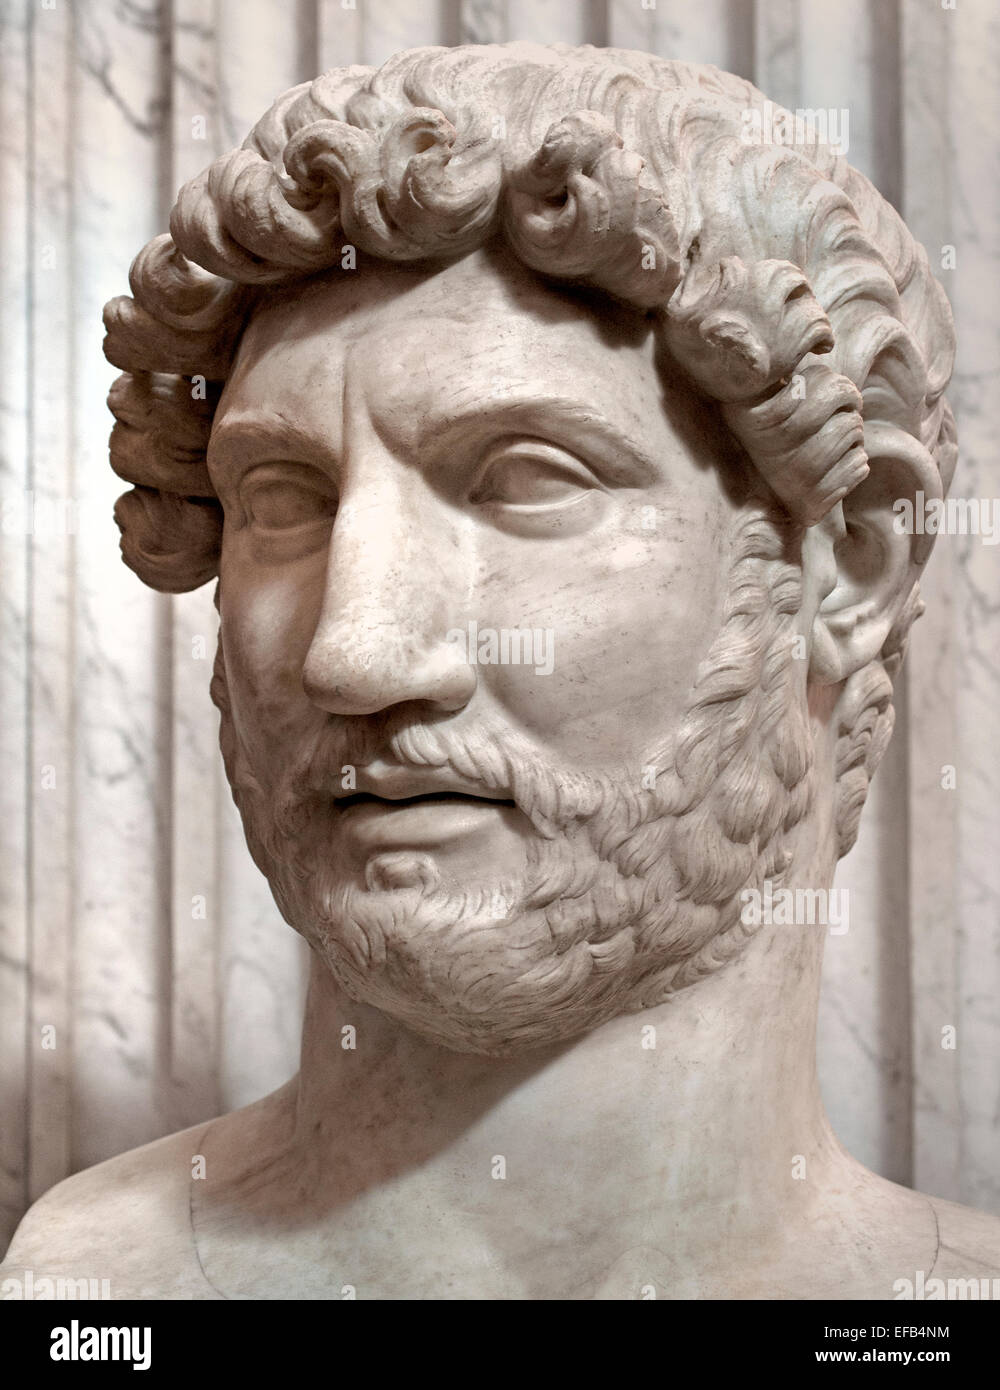 Bust of Emperor Hadrian, from Hadrian's Mausoleum, possibly created following the emperor's death in 138 AD ( Vatican Museum Rome Italy ) Stock Photo